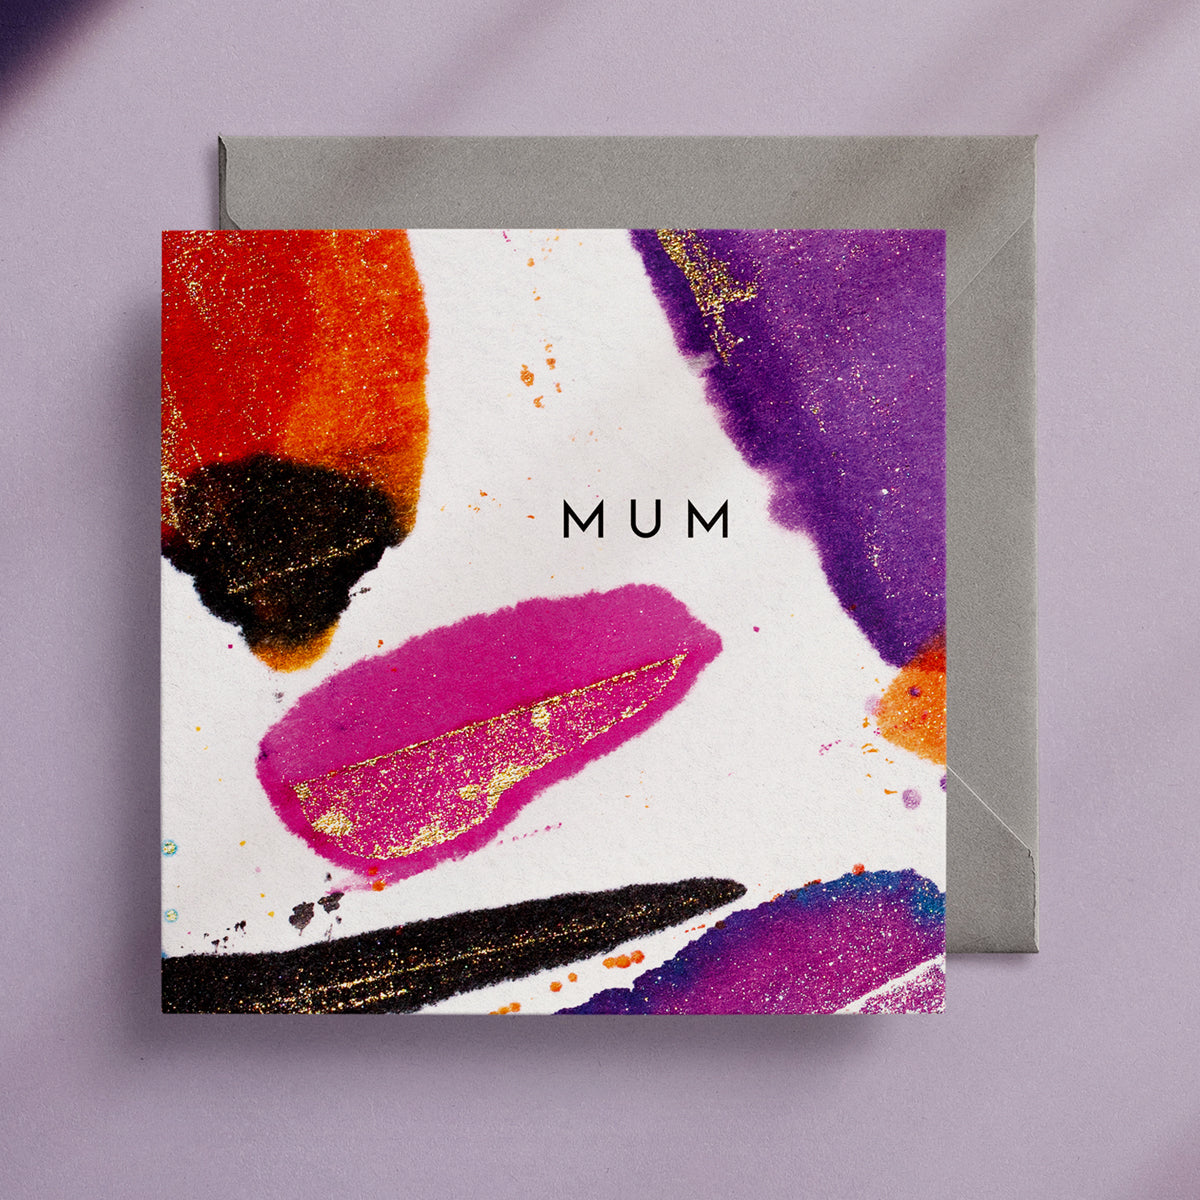 Brightly coloured greeting card that says the word "Mum" in the centre